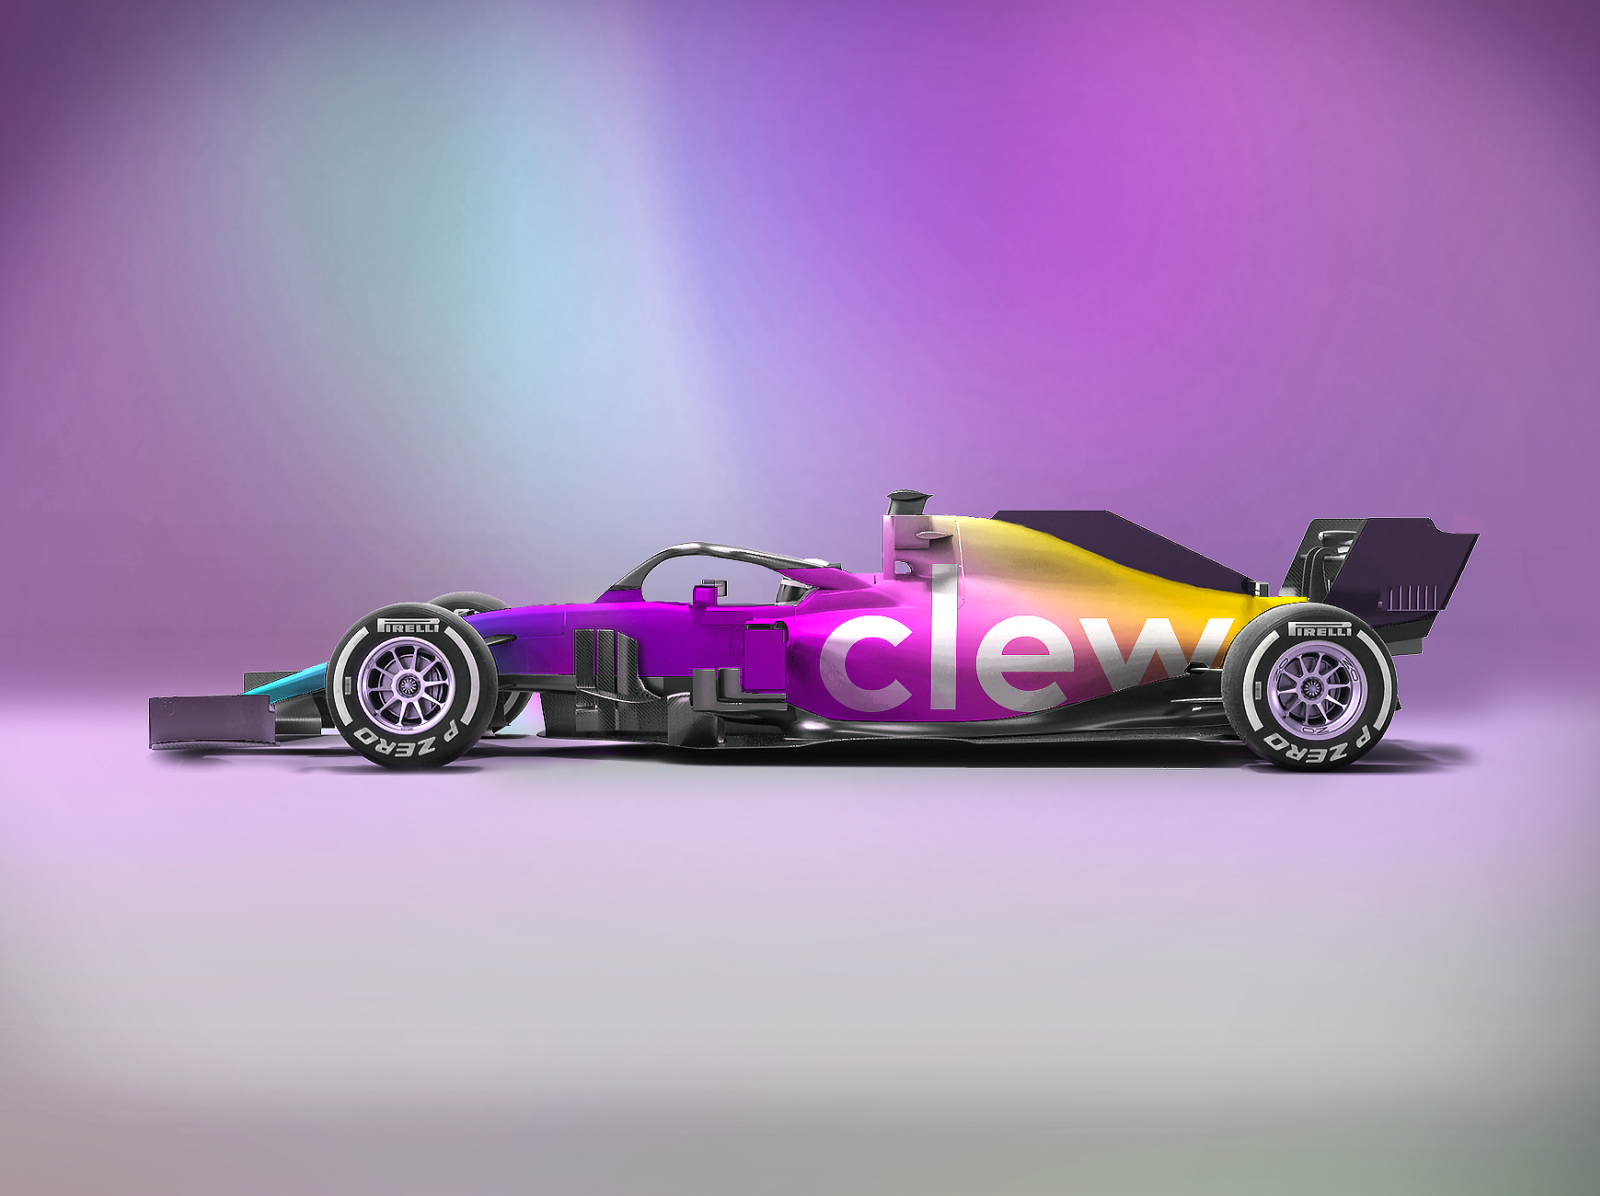 F1 livery concept for Clew by Udara Jay on Dribbble